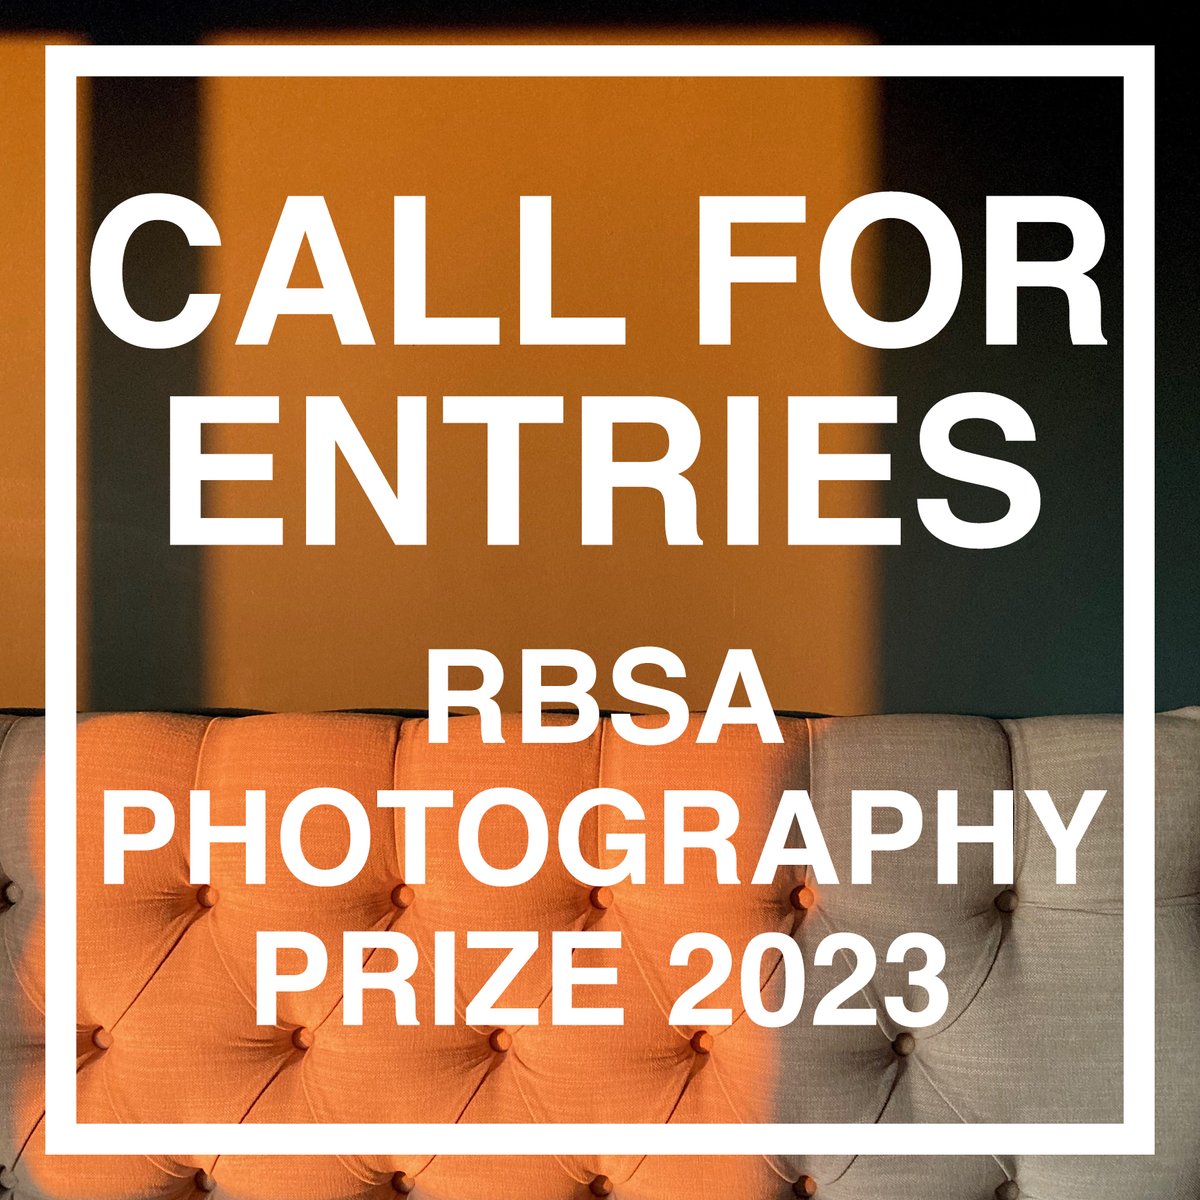 The RBSA Photo Prize is now open for entries, visit rbsa.org.uk/call-for-entri… to enter no matter your experience #callforartists #photography @ArtistOpenCalls @Call4ArtistsUK @callforartists @Call_for_Artist @callsforart @callforentries @The_RPS @kclphotosoc @royal_wales